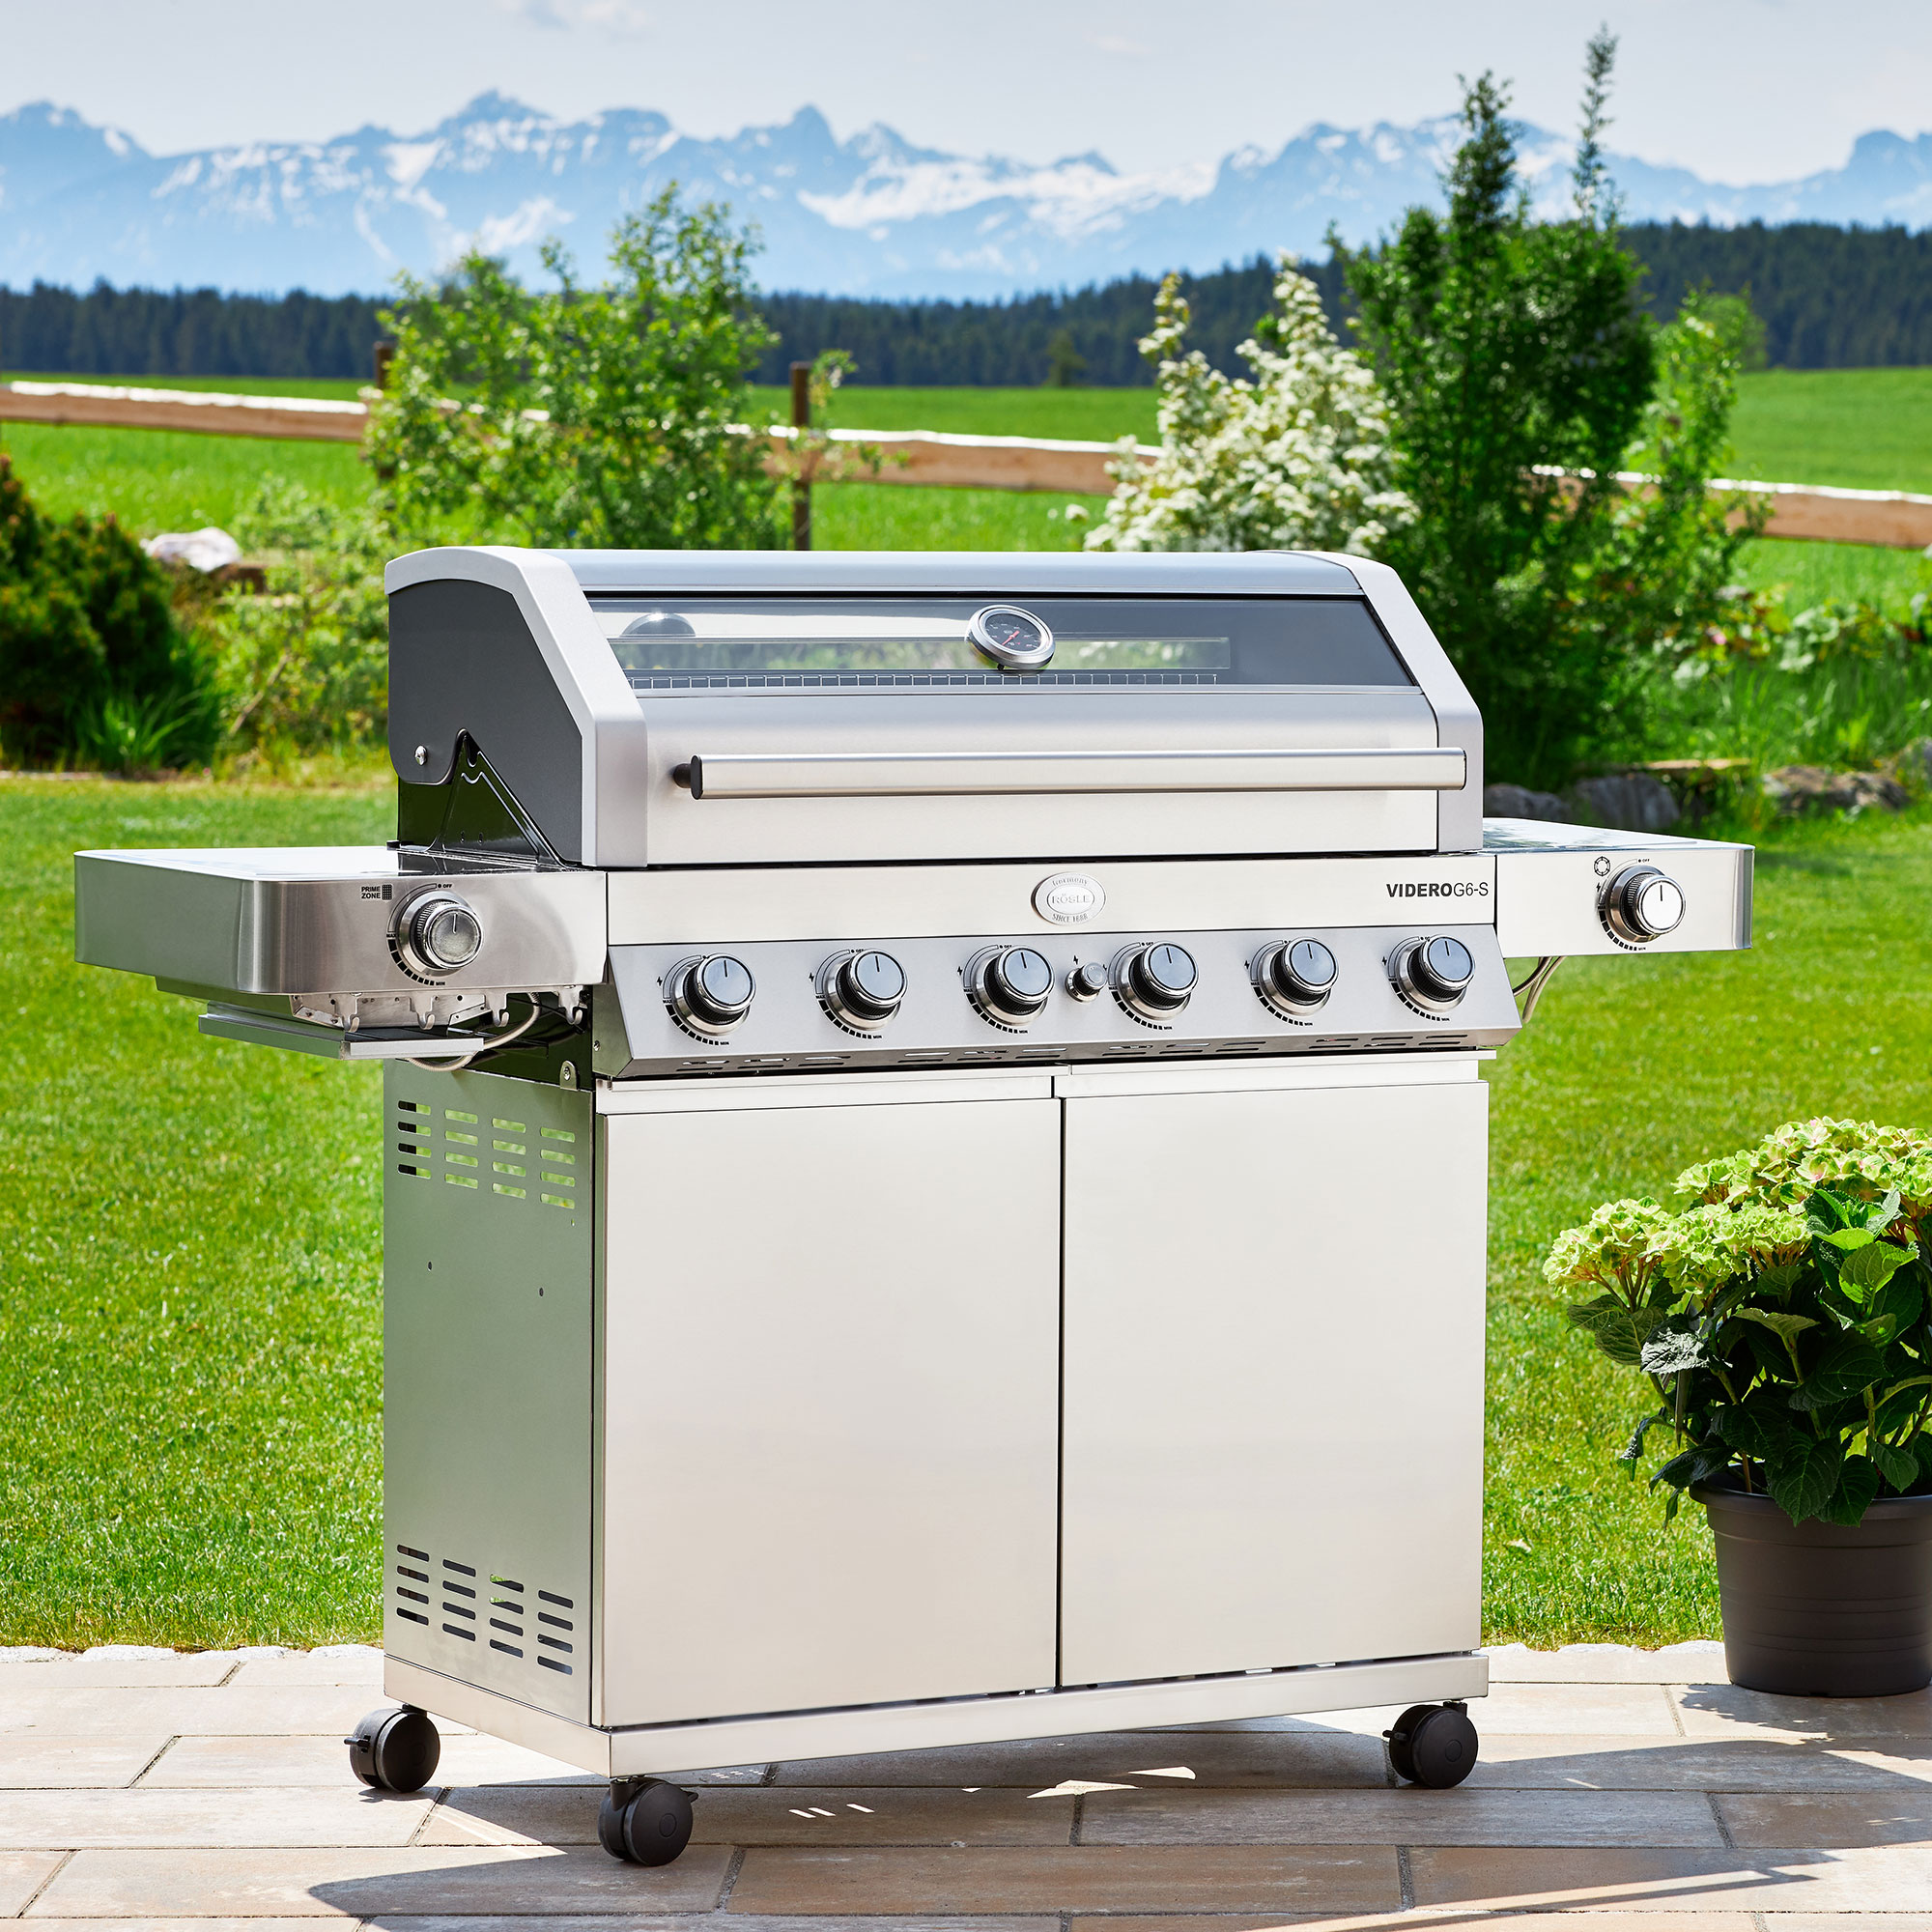 Gas Grill BBQ-Station VIDERO G6-S Vario+ Stainless steel 50 mbar, Exclusive at Grillfürst